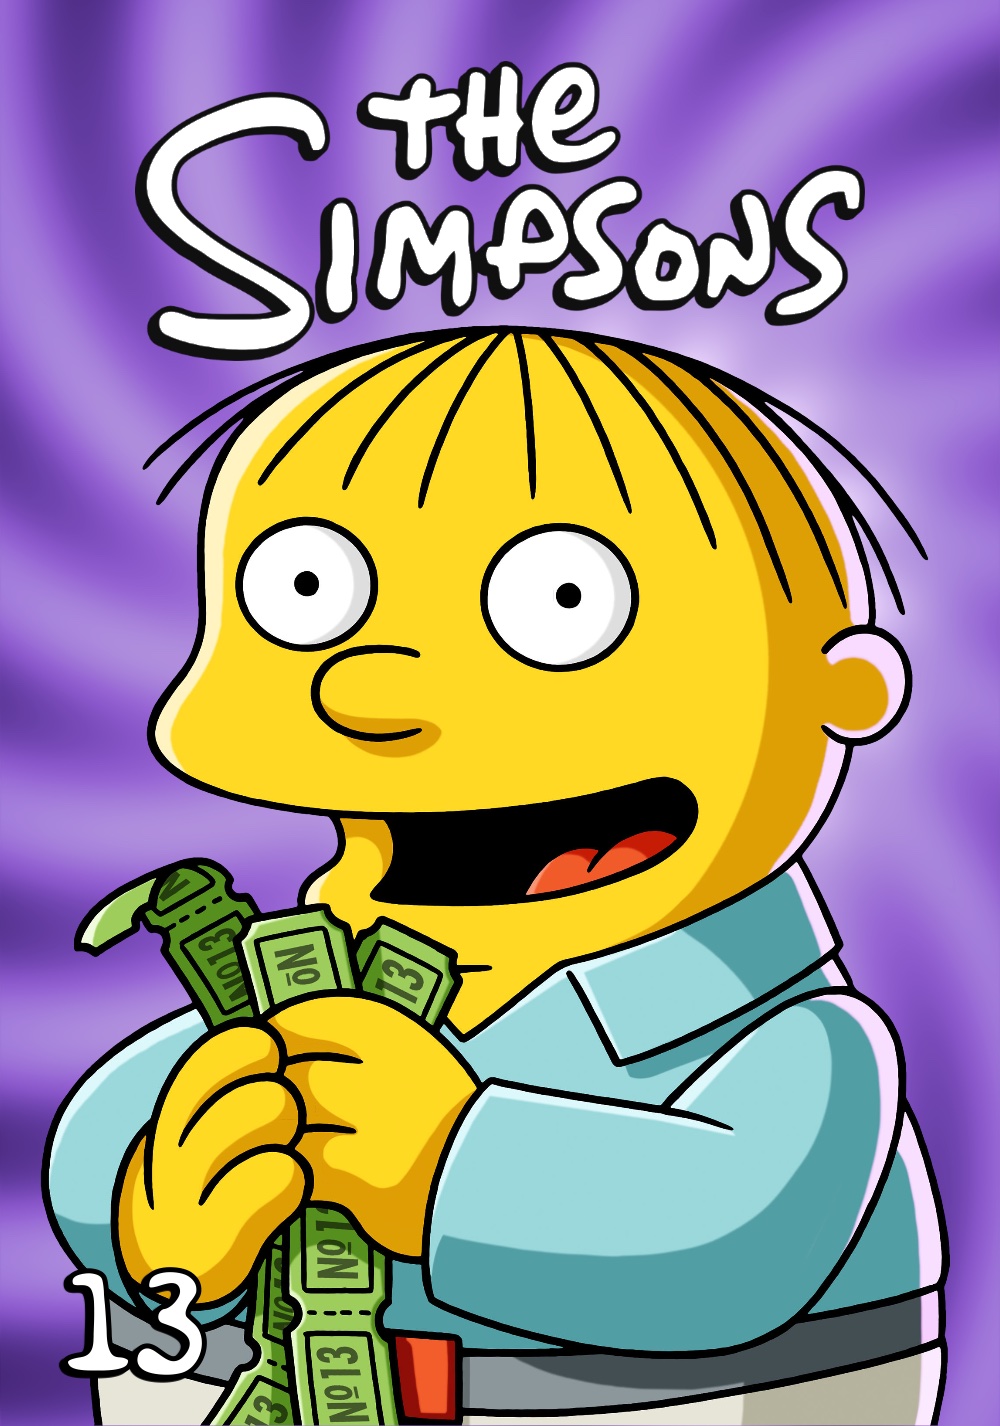 The Simpsons *Ultimate Collection* S13 (2001) BDRip 1080p HEVC 10-bit DTS 5.1 NL Subs